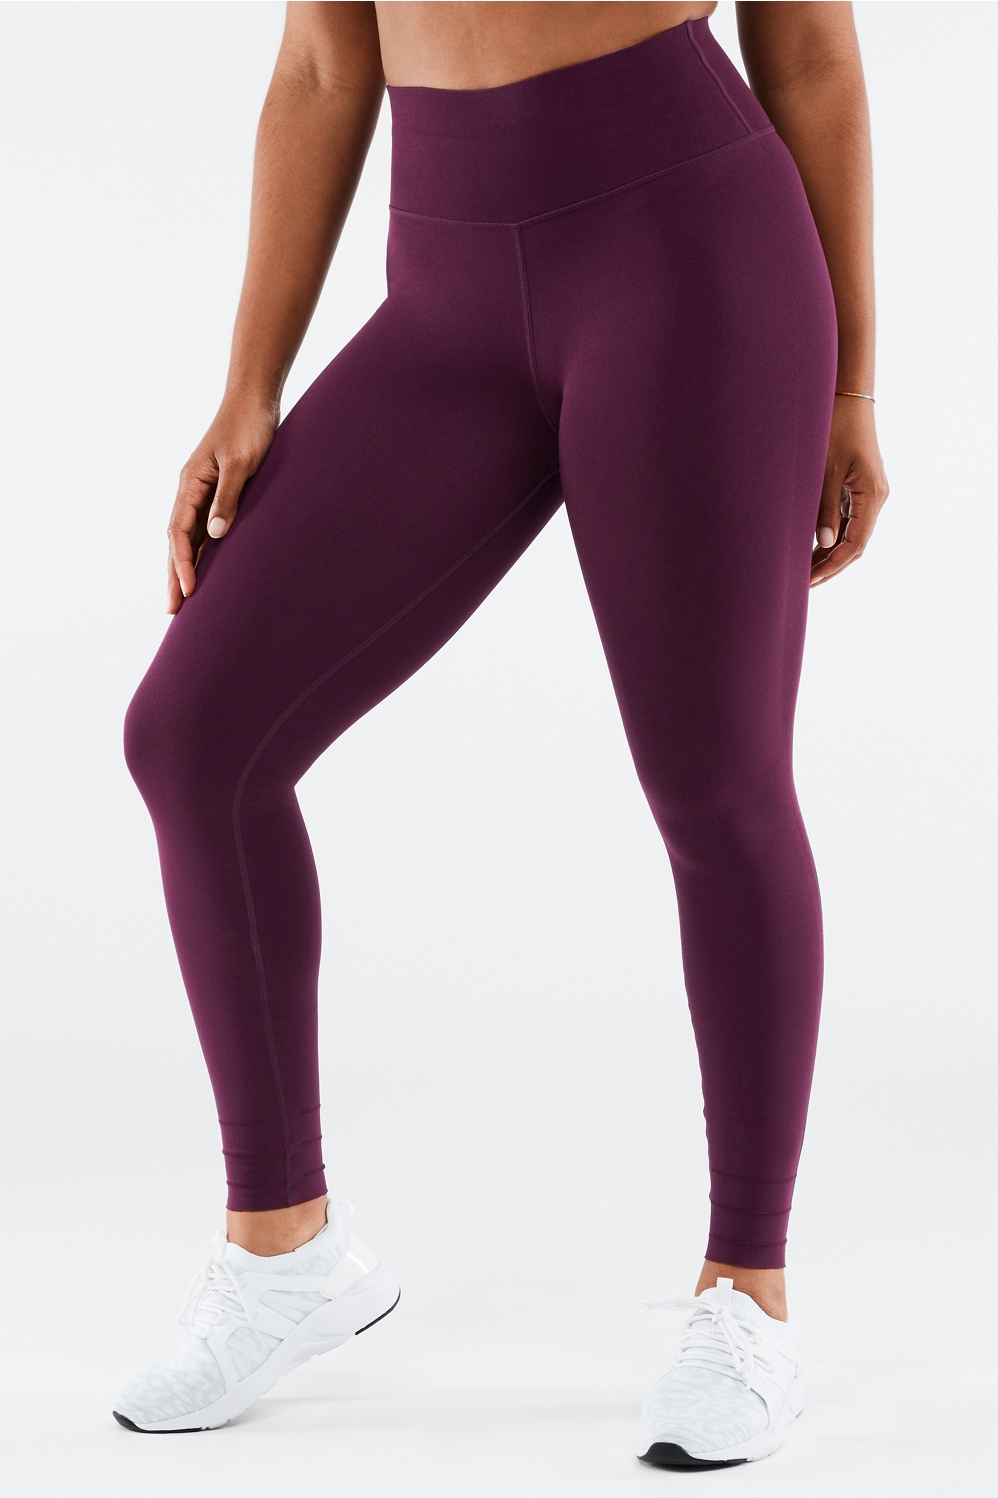 Alloy Apparel Tall Lexi Legging for Women in Eggplant Size 2XL length 37